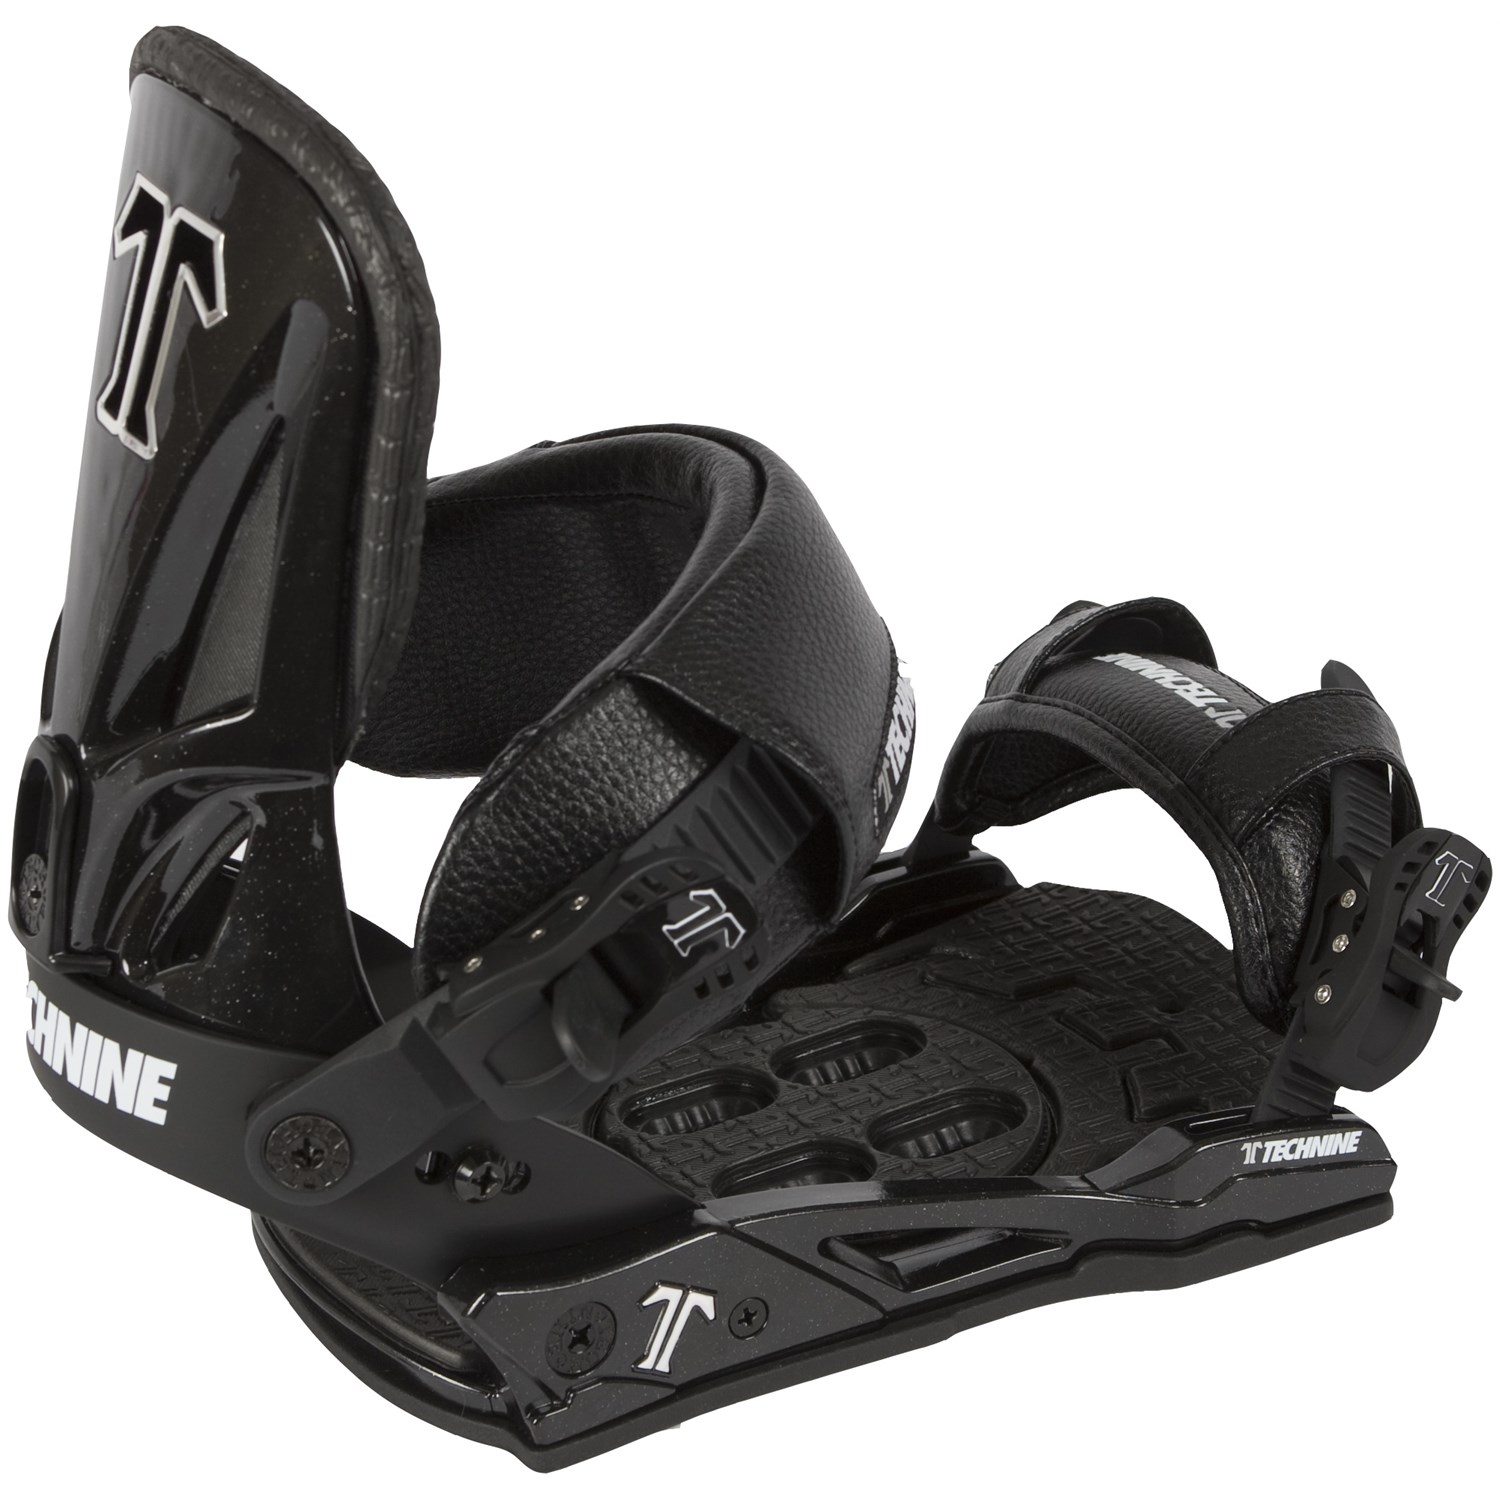 Binding Parts and Features  Technine Snowboarding – Technine USA